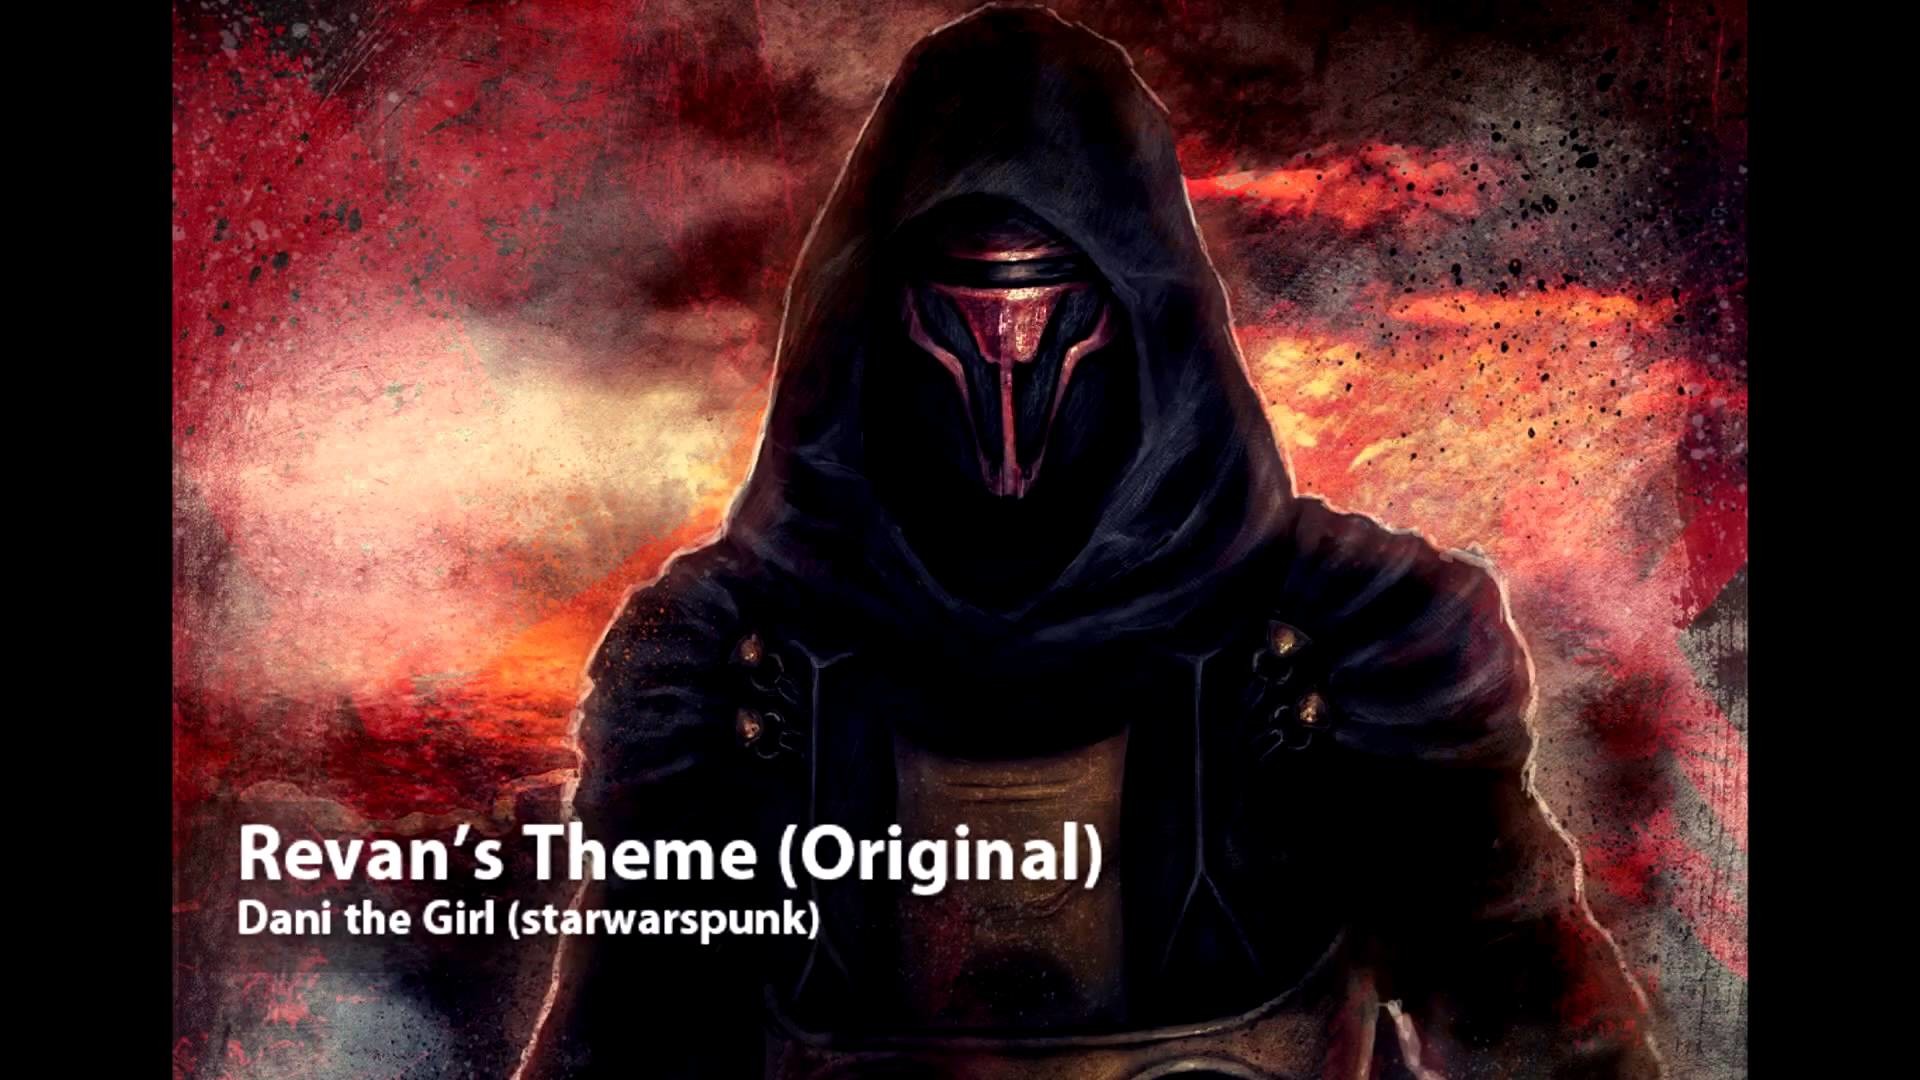 Revans Theme Original Instrumental Piano Song Inspired by Star Wars KOTOR FREE DOWNLOAD – YouTube